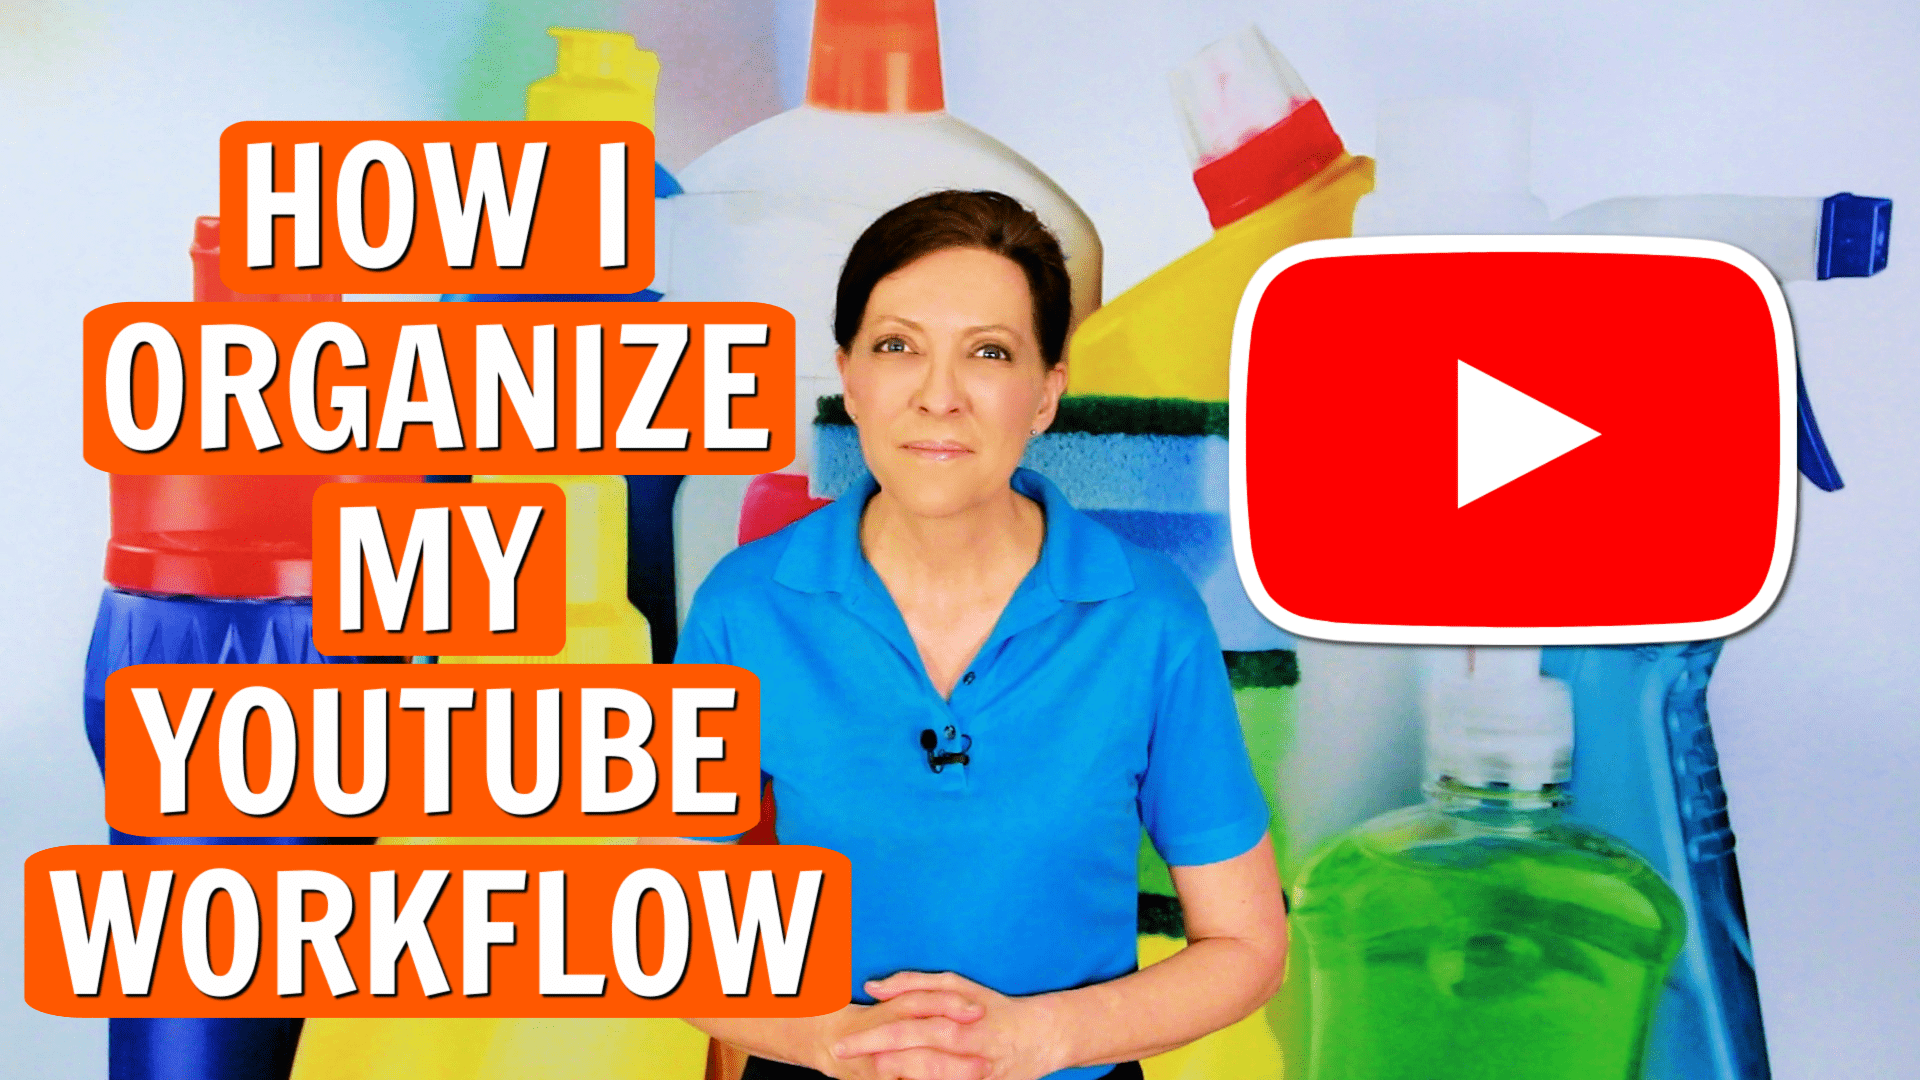 How I Organize My YouTube Workflow, Angela Brown, Savvy Cleaner